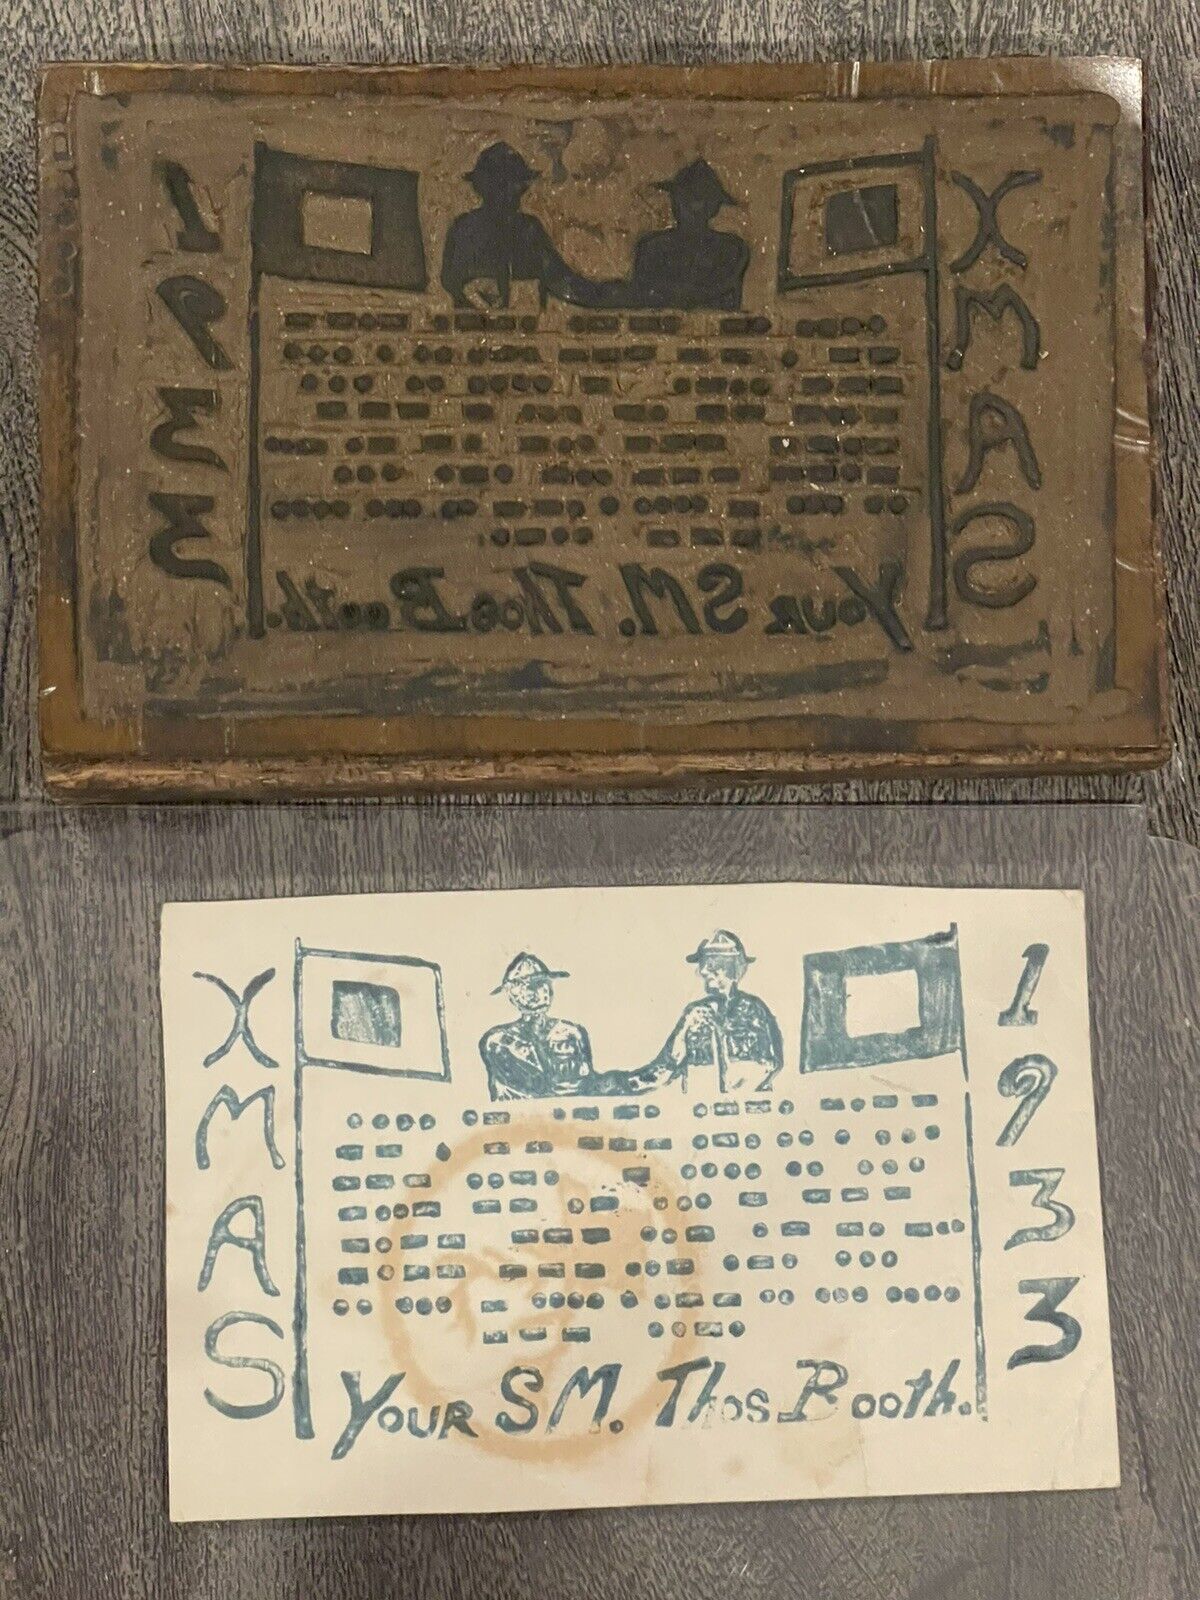 1933 Boy Scouts Christmas Card & Wood Block print Thos Booth morse code UNIQUE